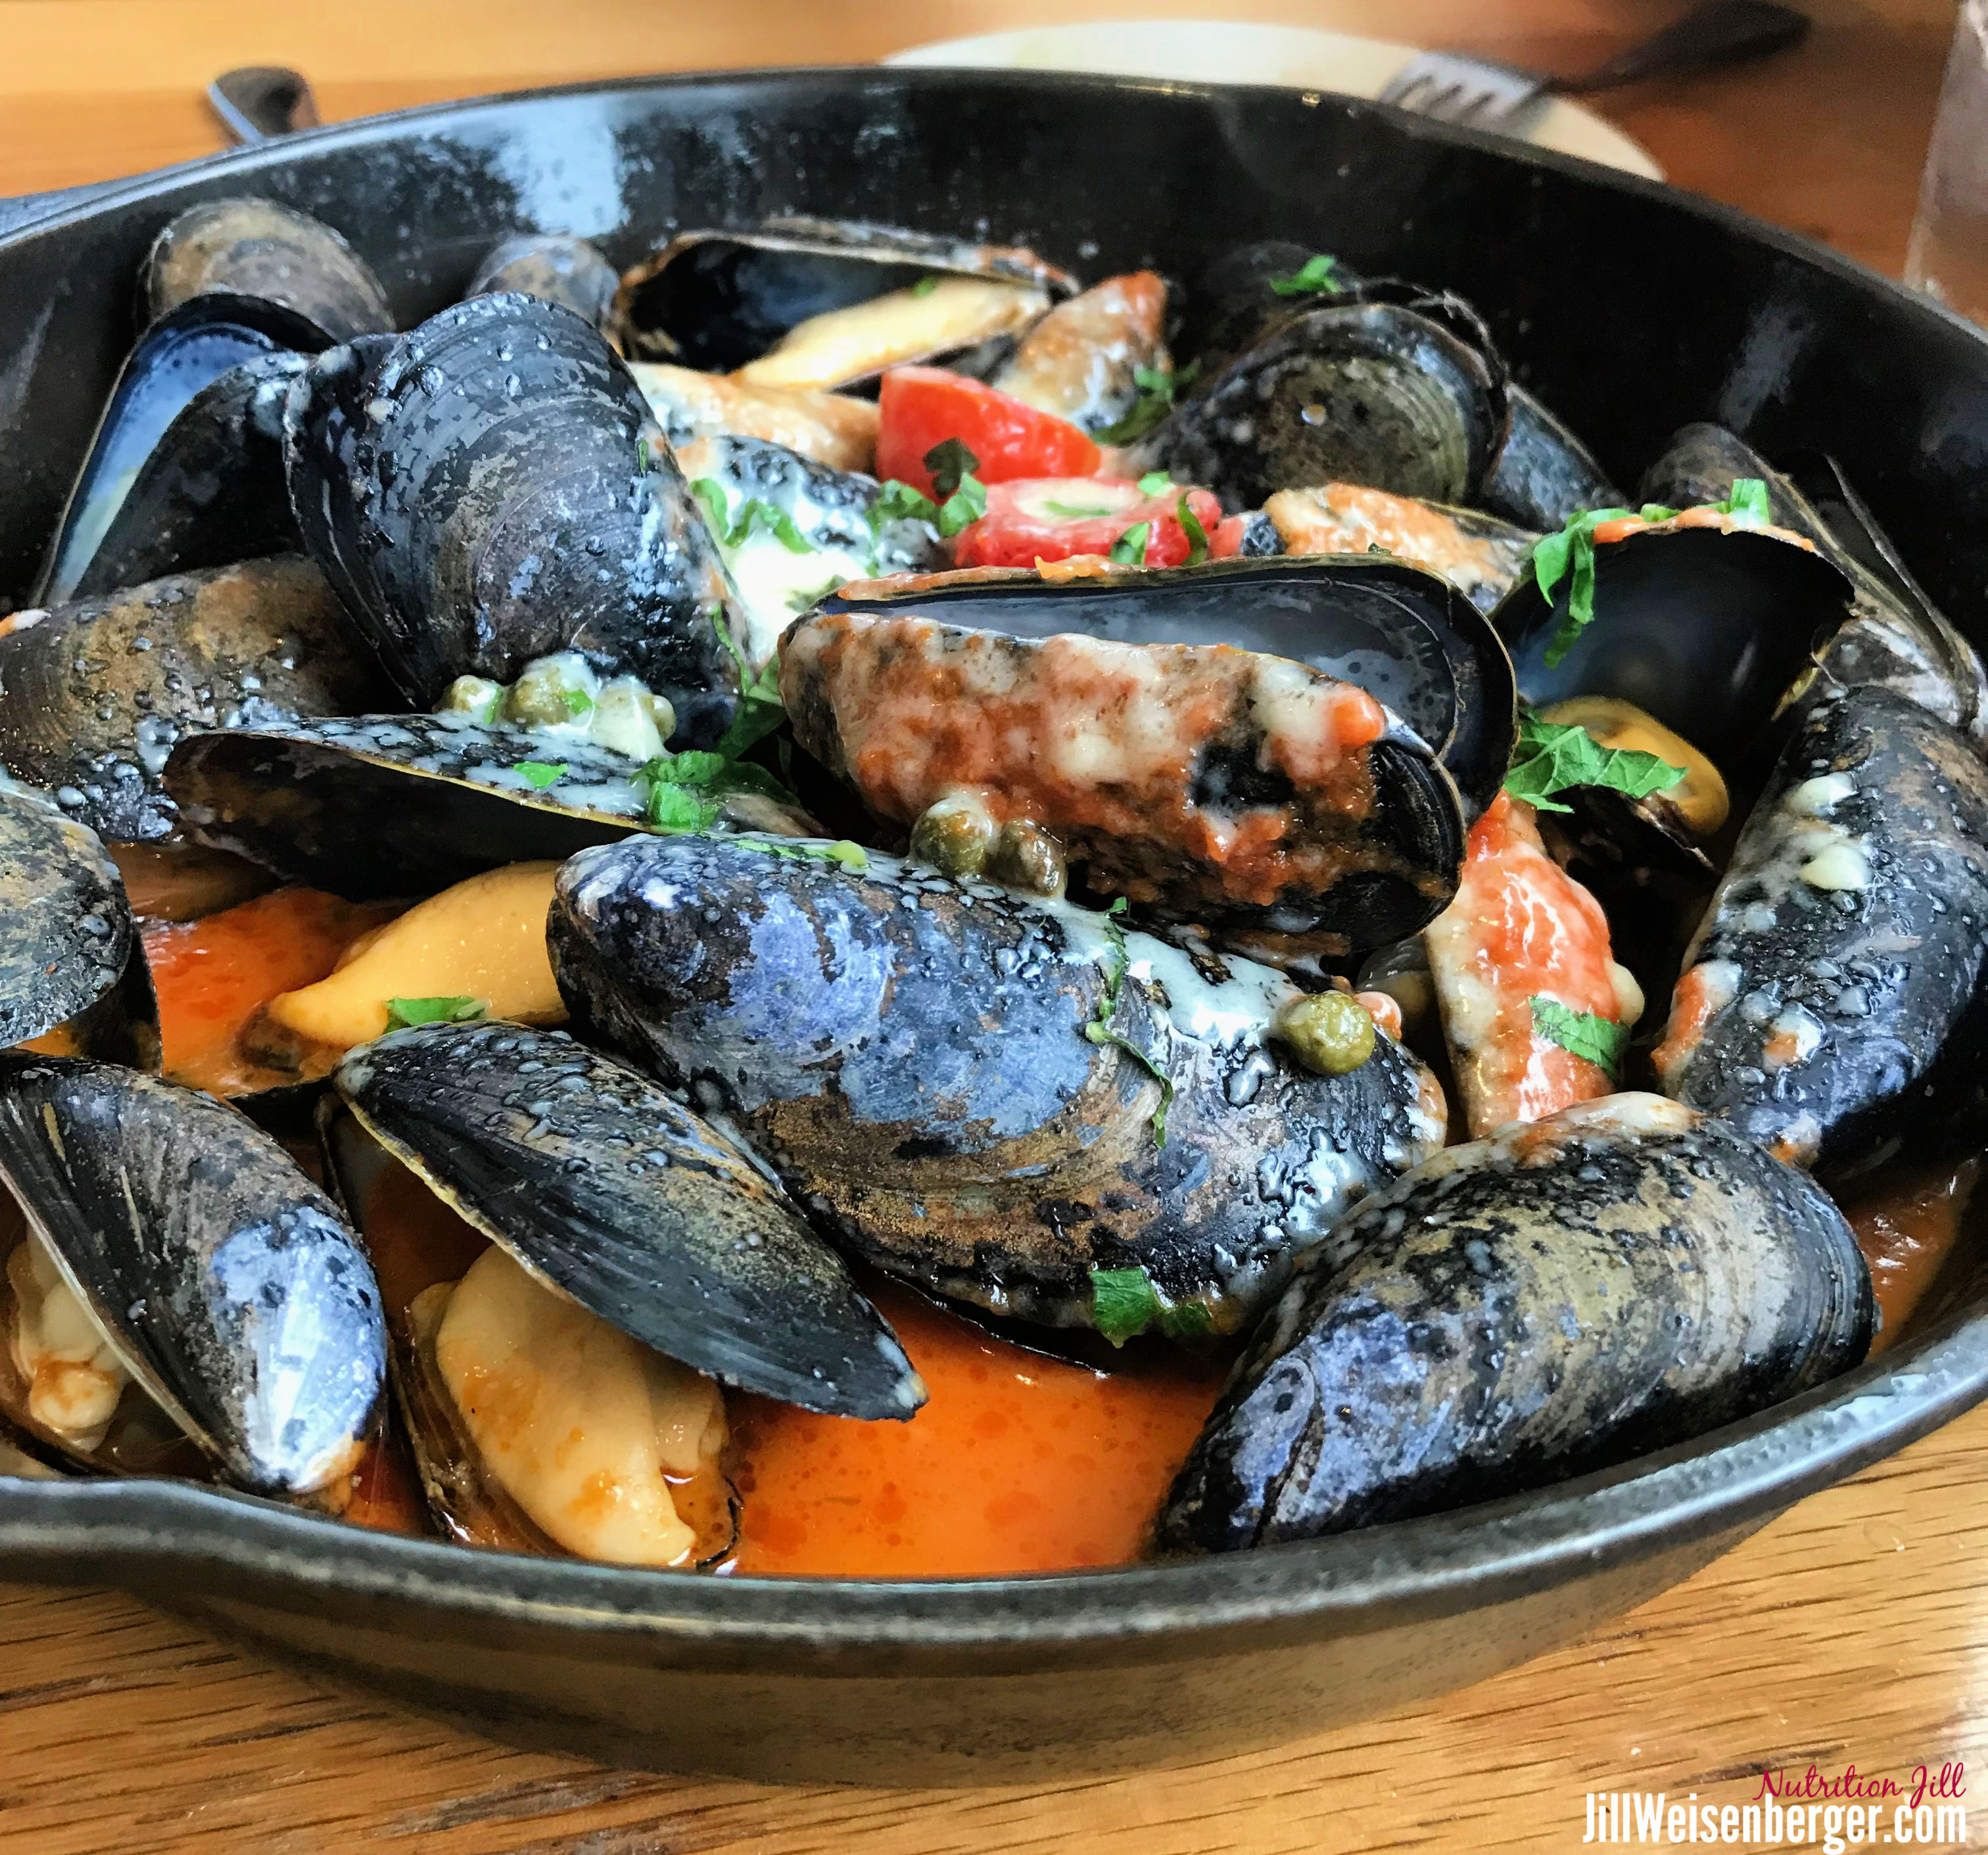 eating out healthy with mussels